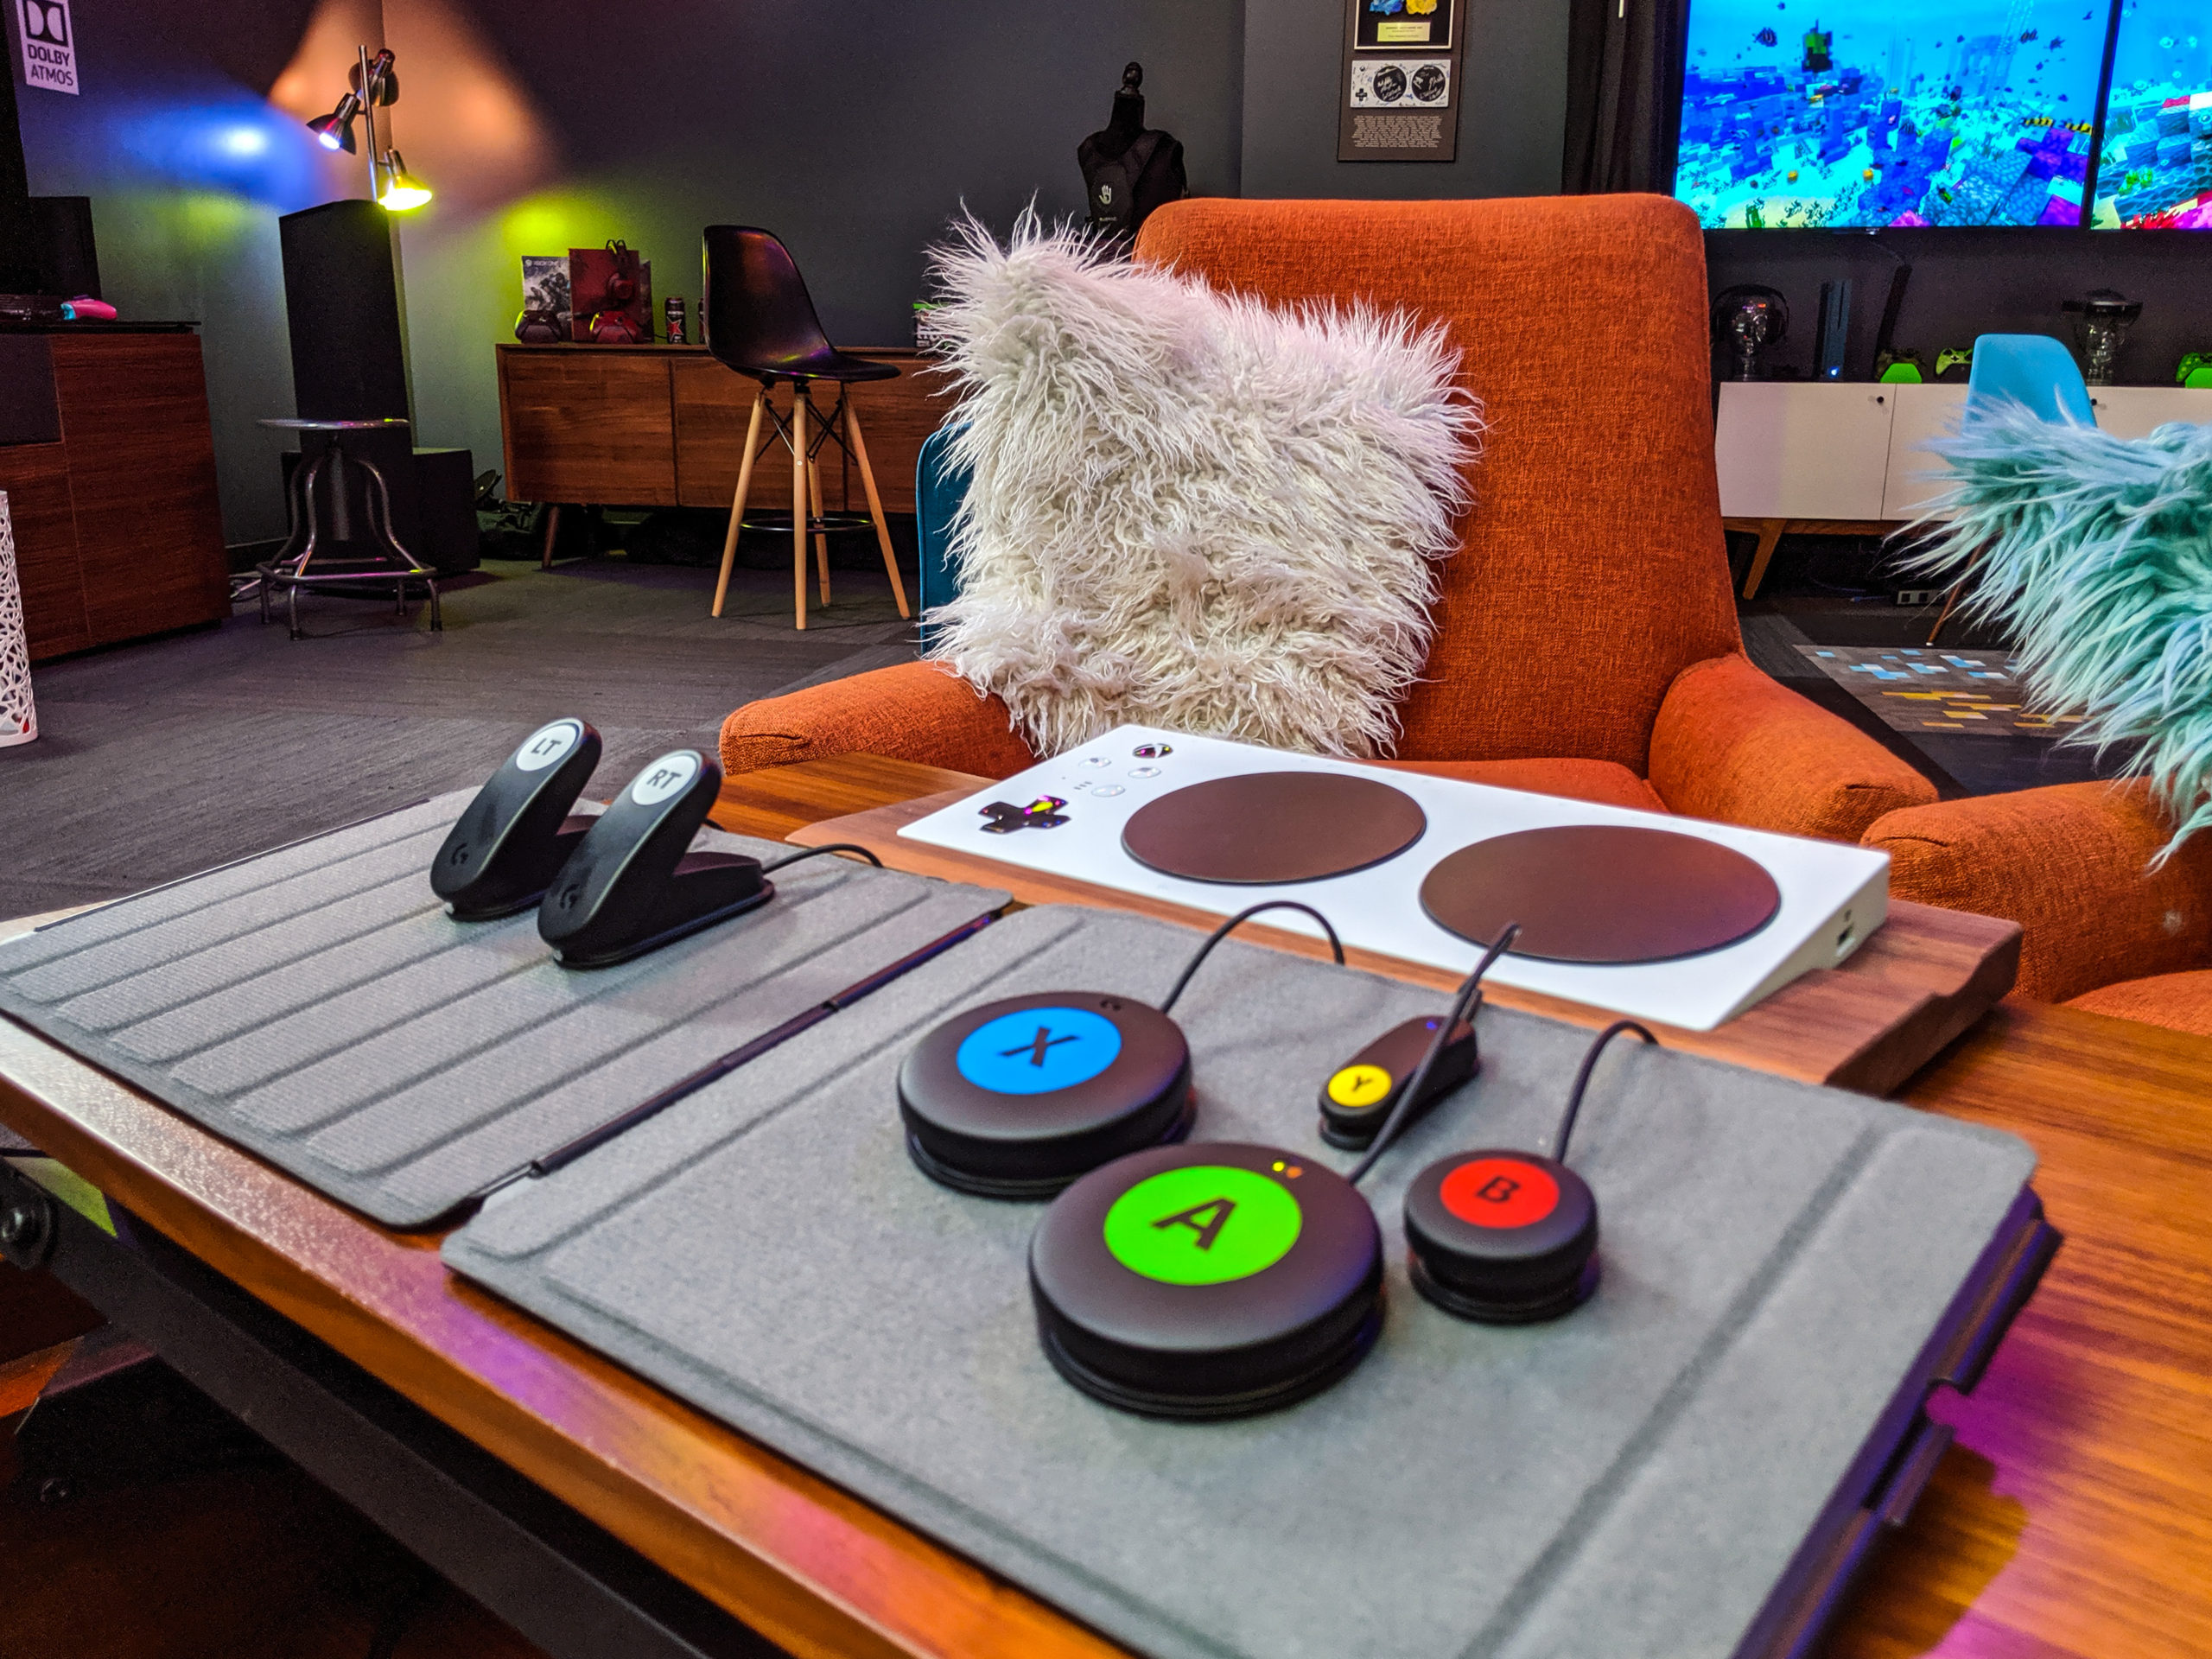 Logitech improves on the XBox Adaptive Controller with a cost-effective control package